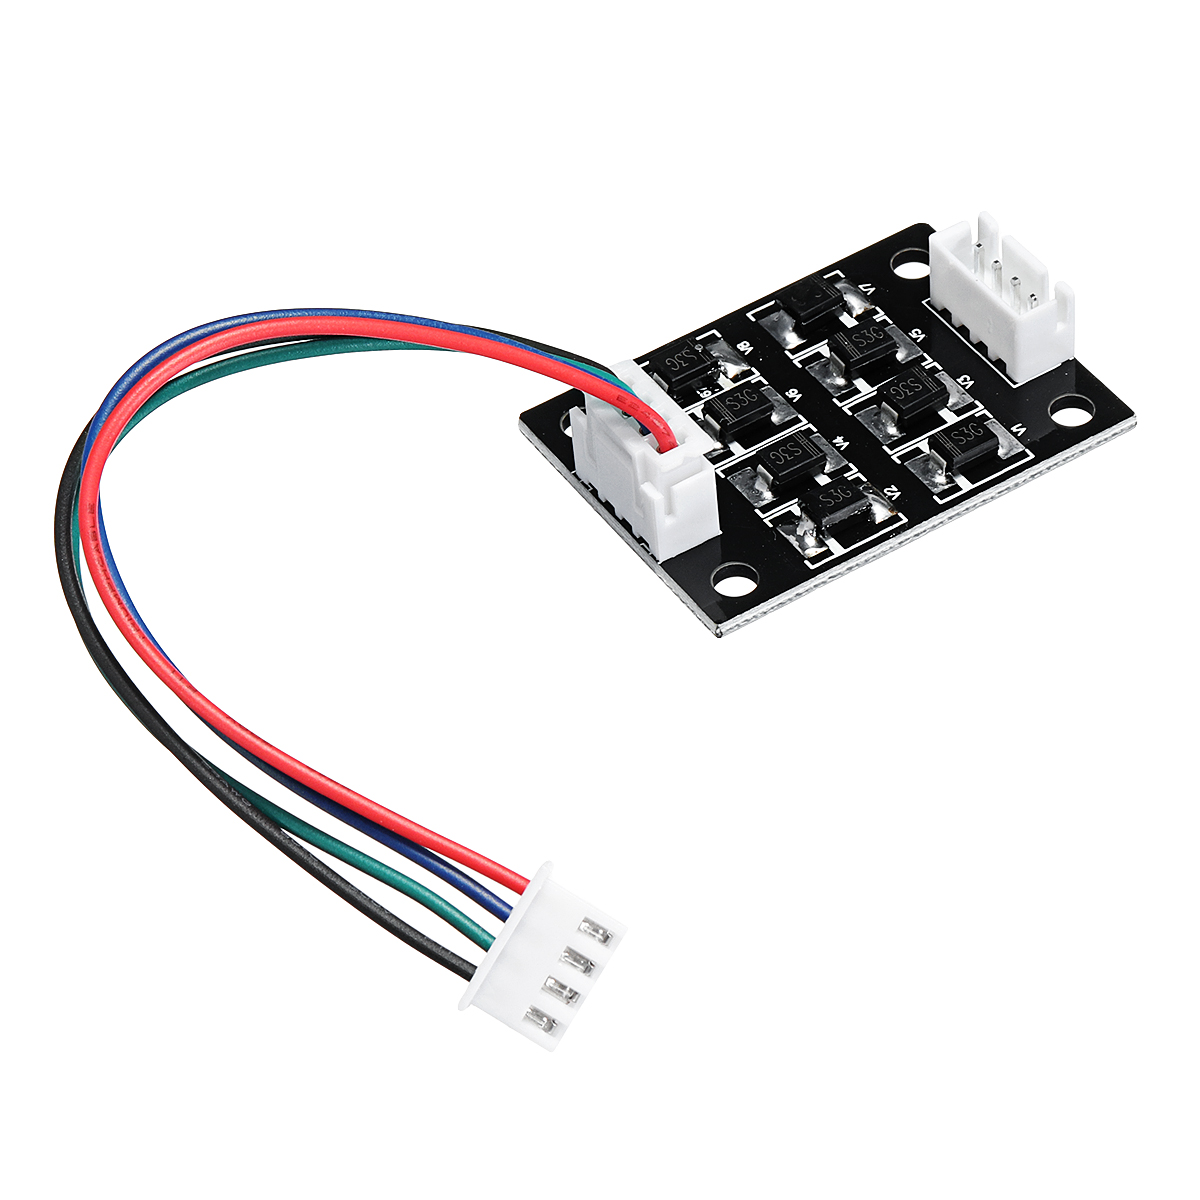 

3PCS TL-Smoother Addon Module With Dupont Line For 3D Printer Stepper Motor